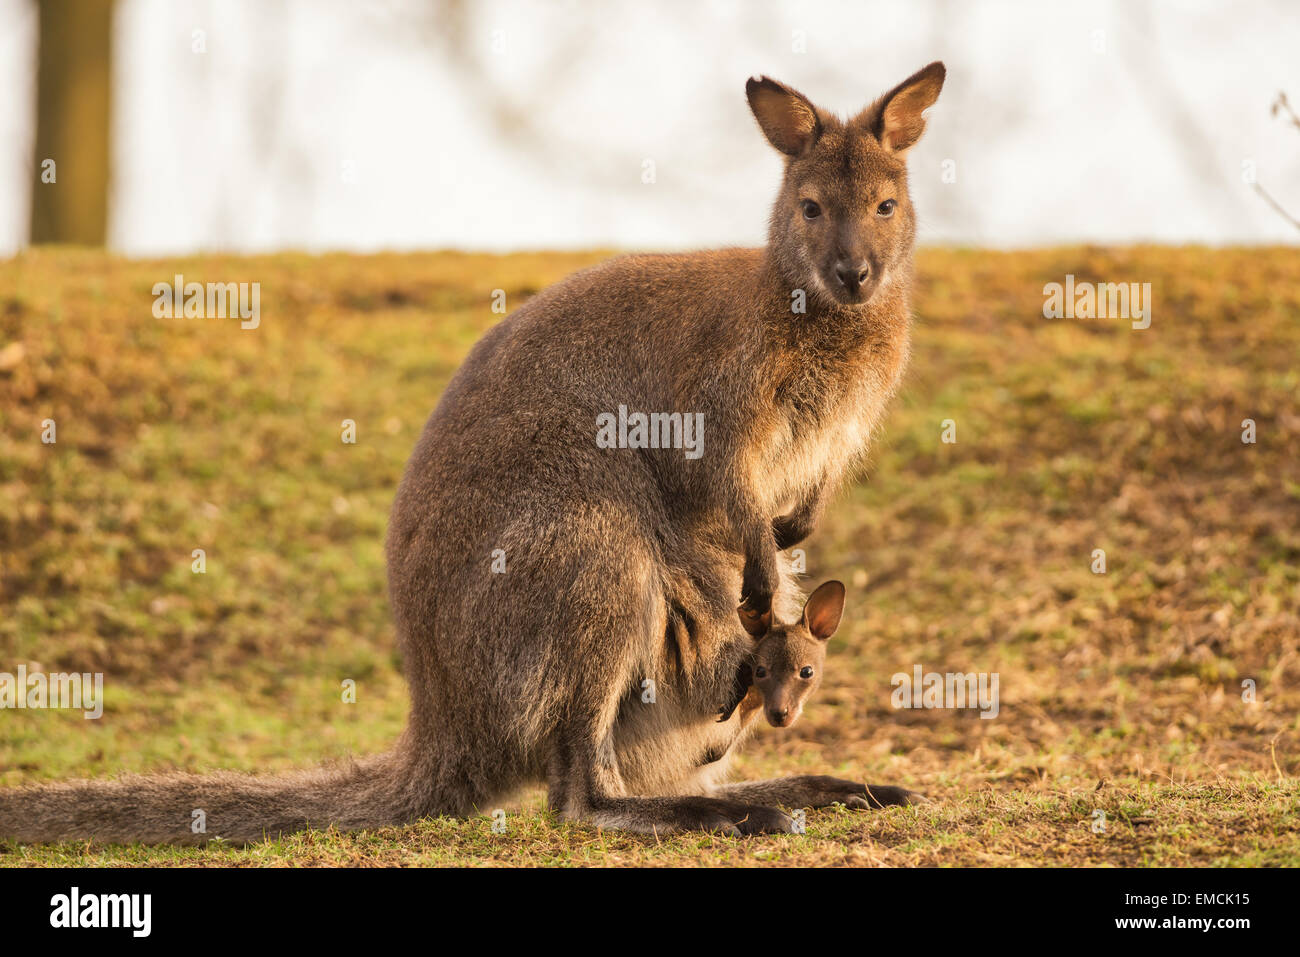 Kangaroo Mother, Common wallaroo (Macropus robustus), with a Baby Joey in the Pouch Stock Photo